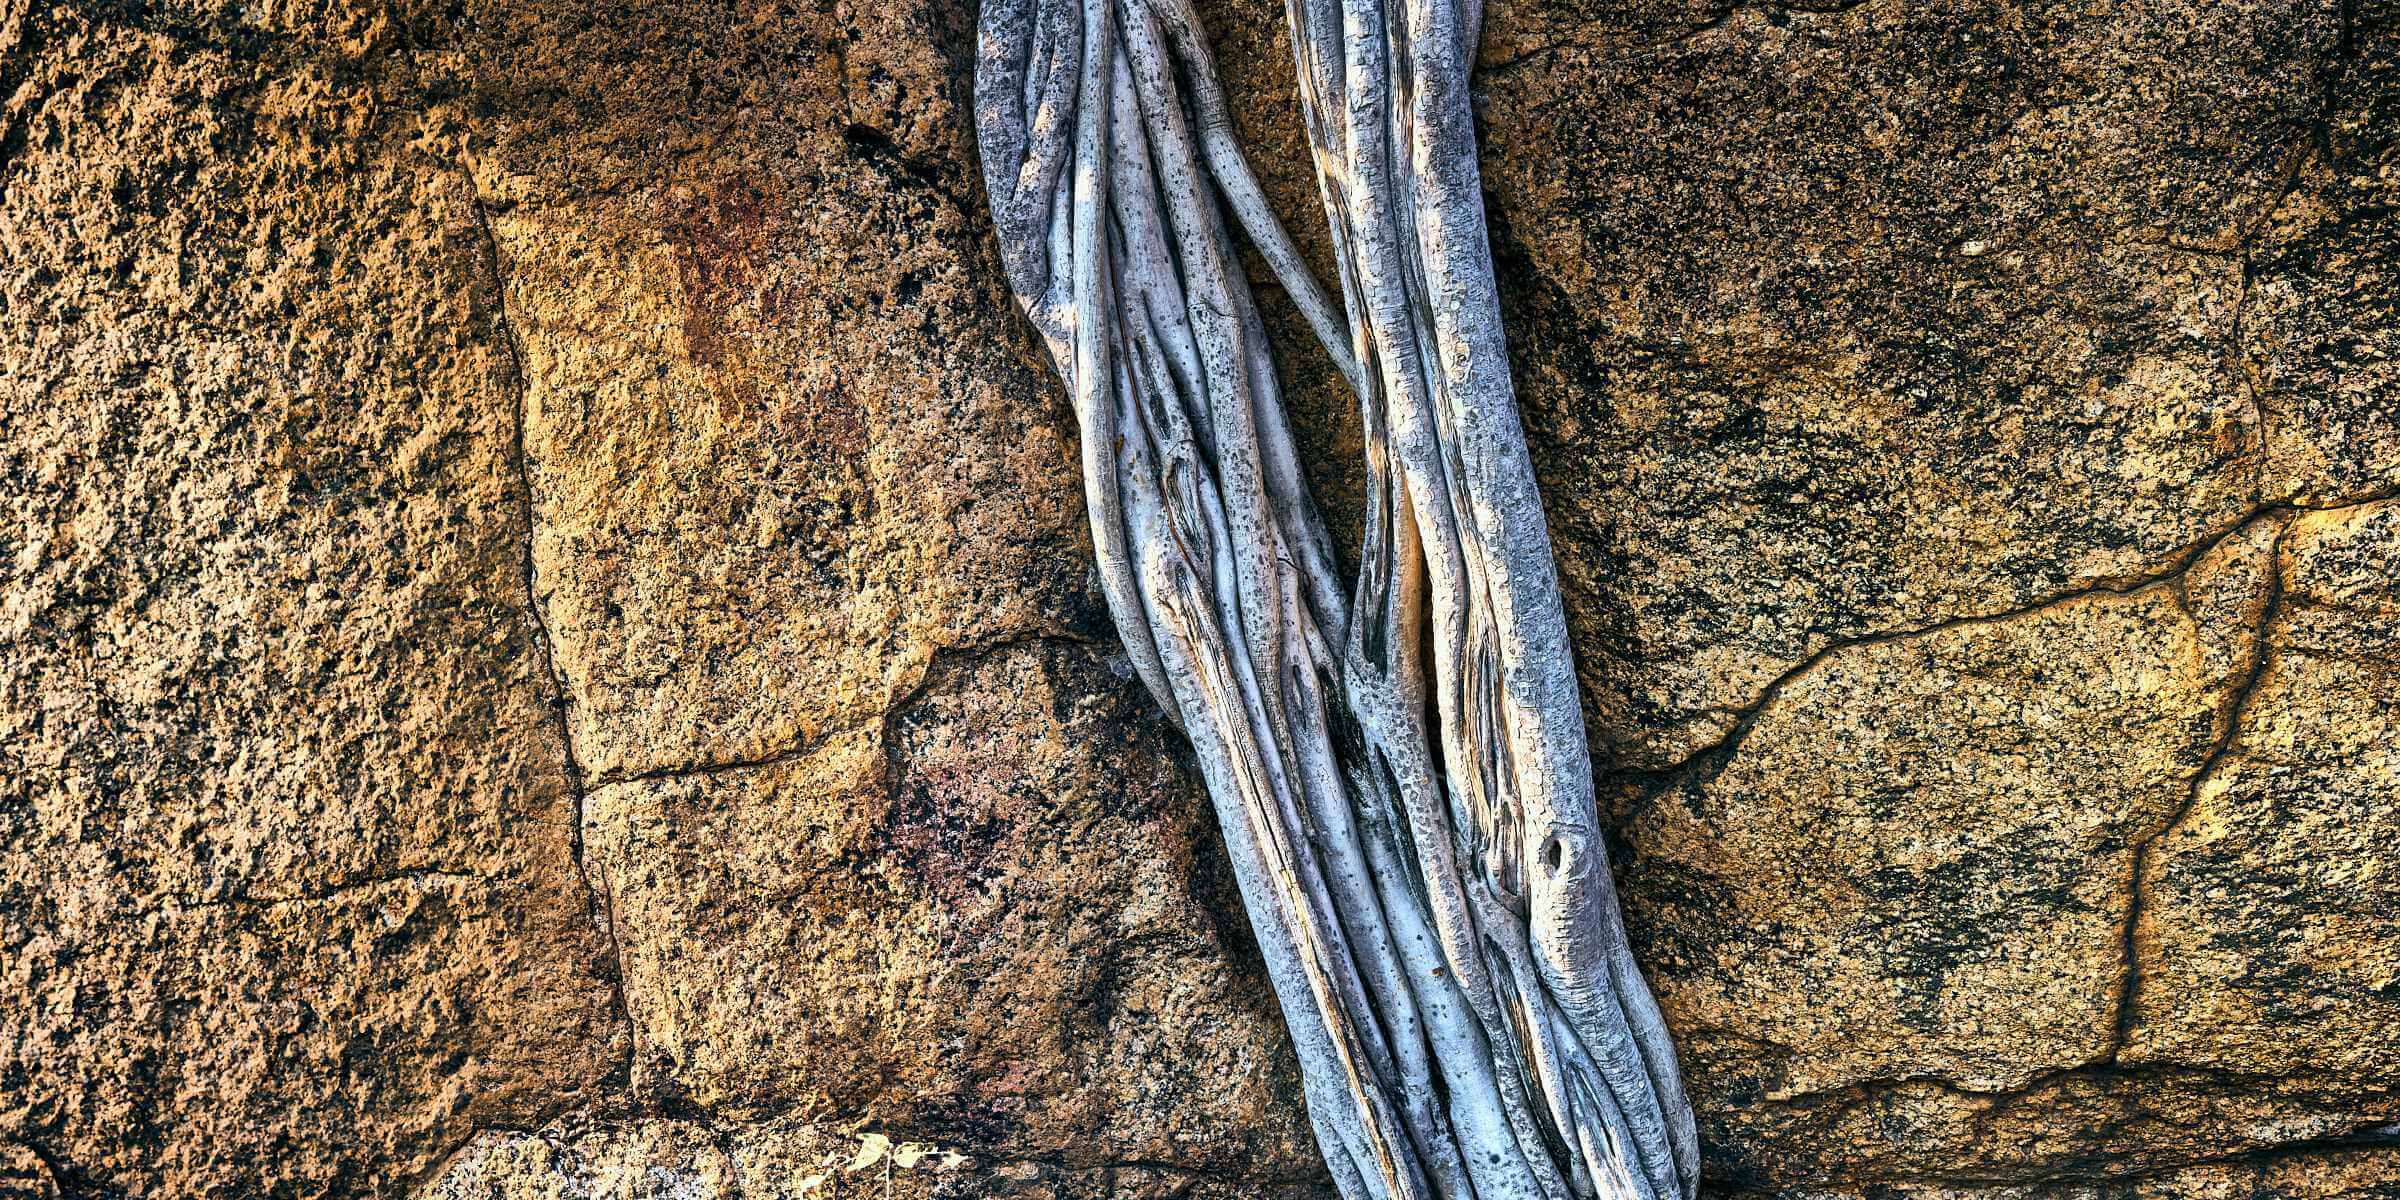 The roots of a wild fig tree clinging to the rock outcrop.